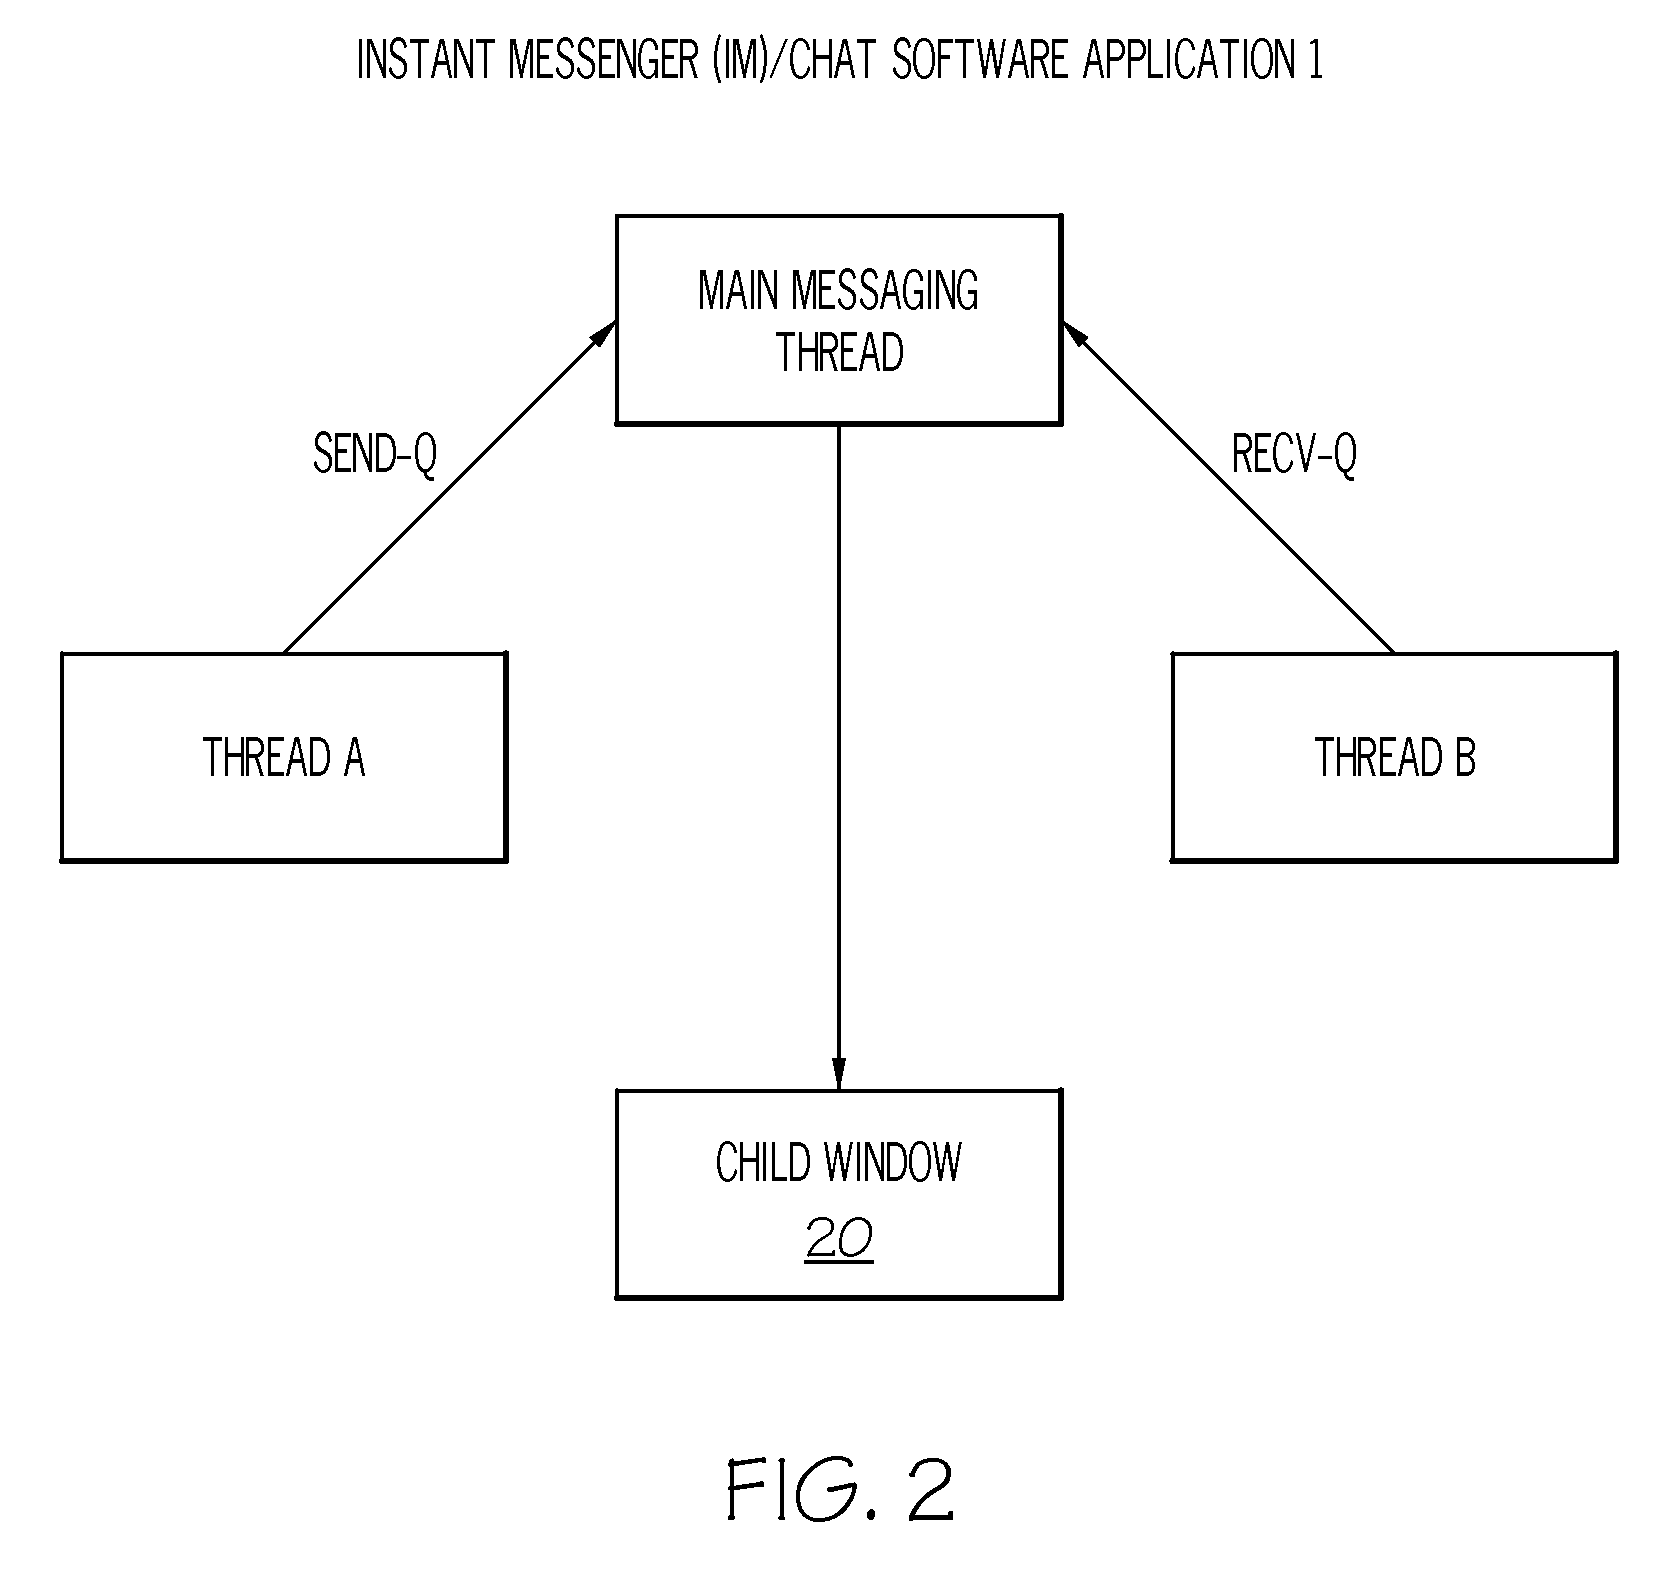 Method and system for enhancing communication with instant messenger/chat computer software applications